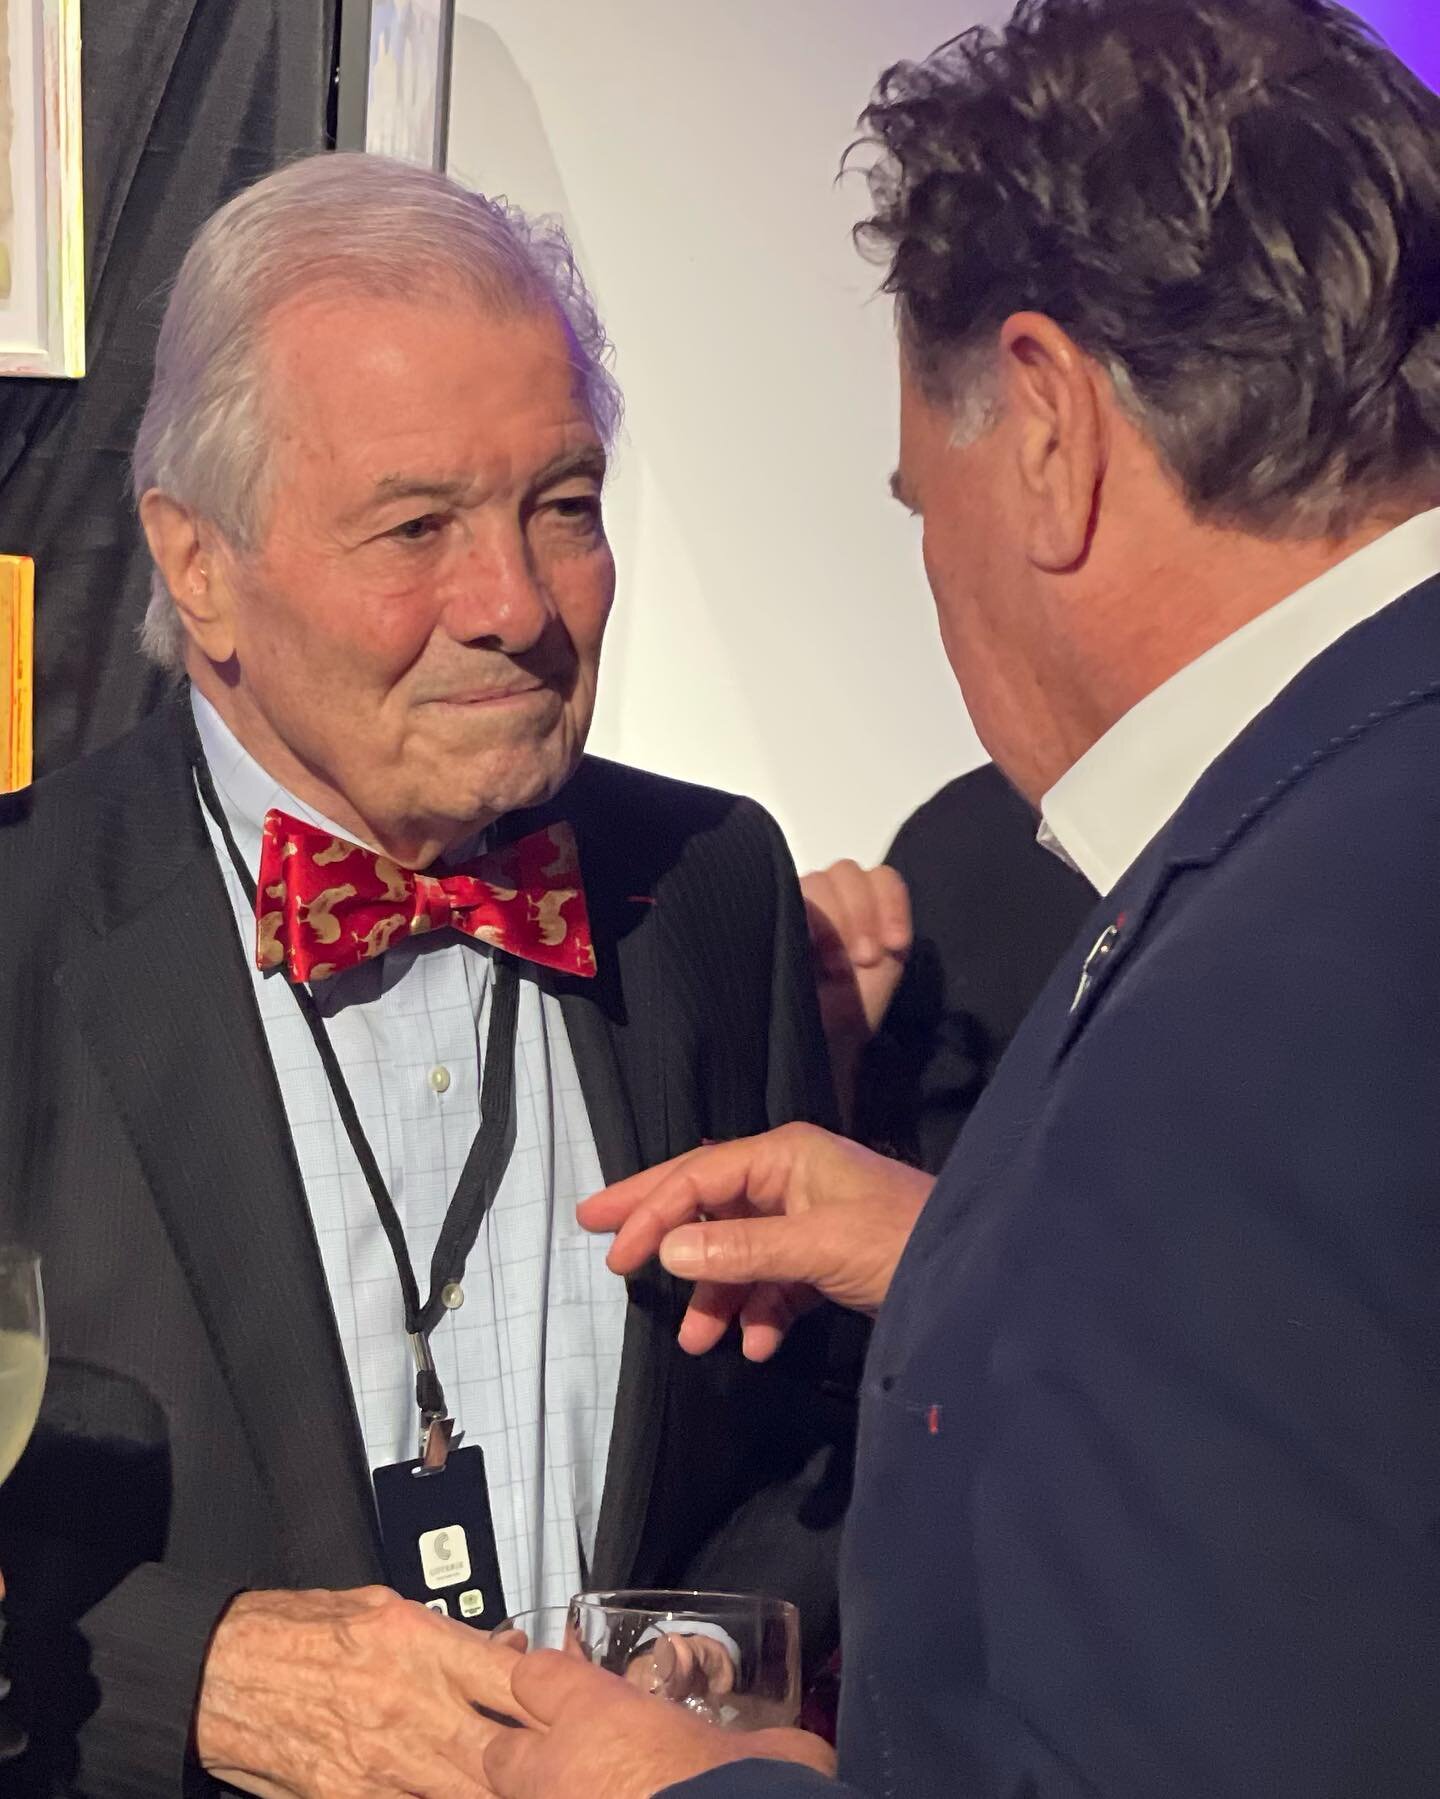 What a night at The Greenwich Wine &amp; Food Festival honoring Jacques Pepin! Dined with @restaurant__lostal Chef Jared and @serendipitymagazine. 

Jacques has been a long time culinary and personal inspiration, it was an honor to meet him. 

#nukit